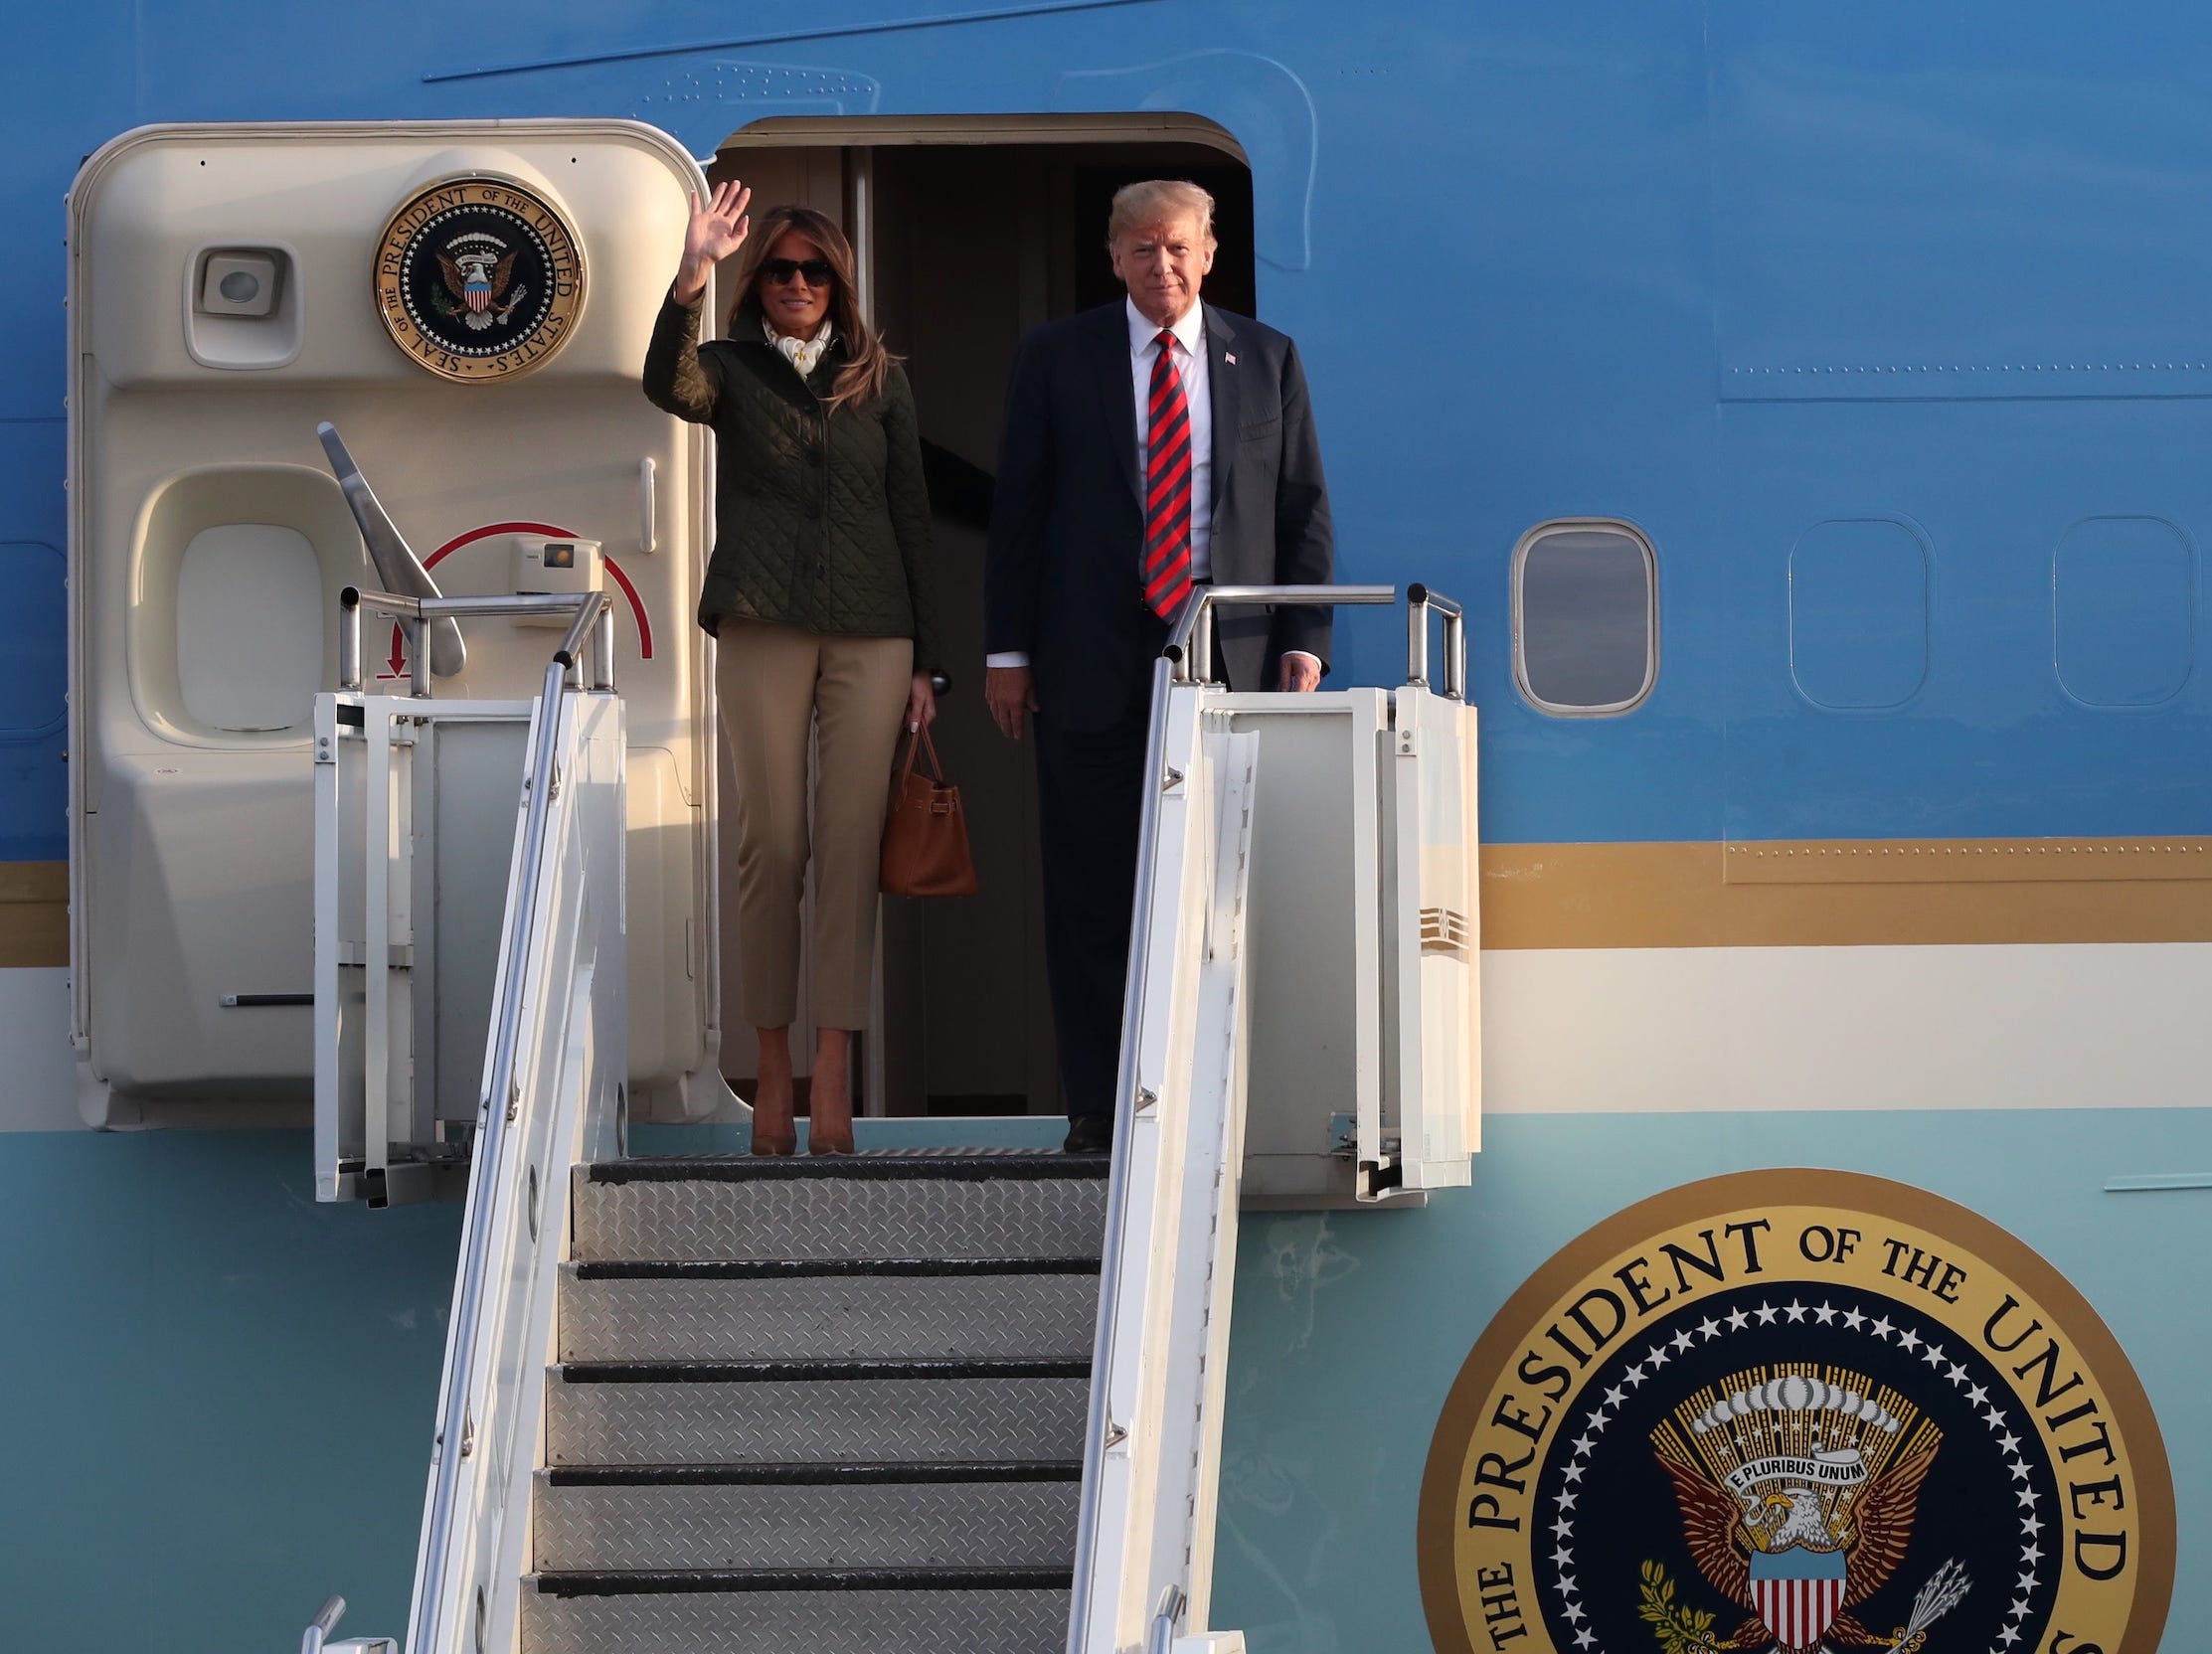 Donald and Melania Trump walking off Air Force One.